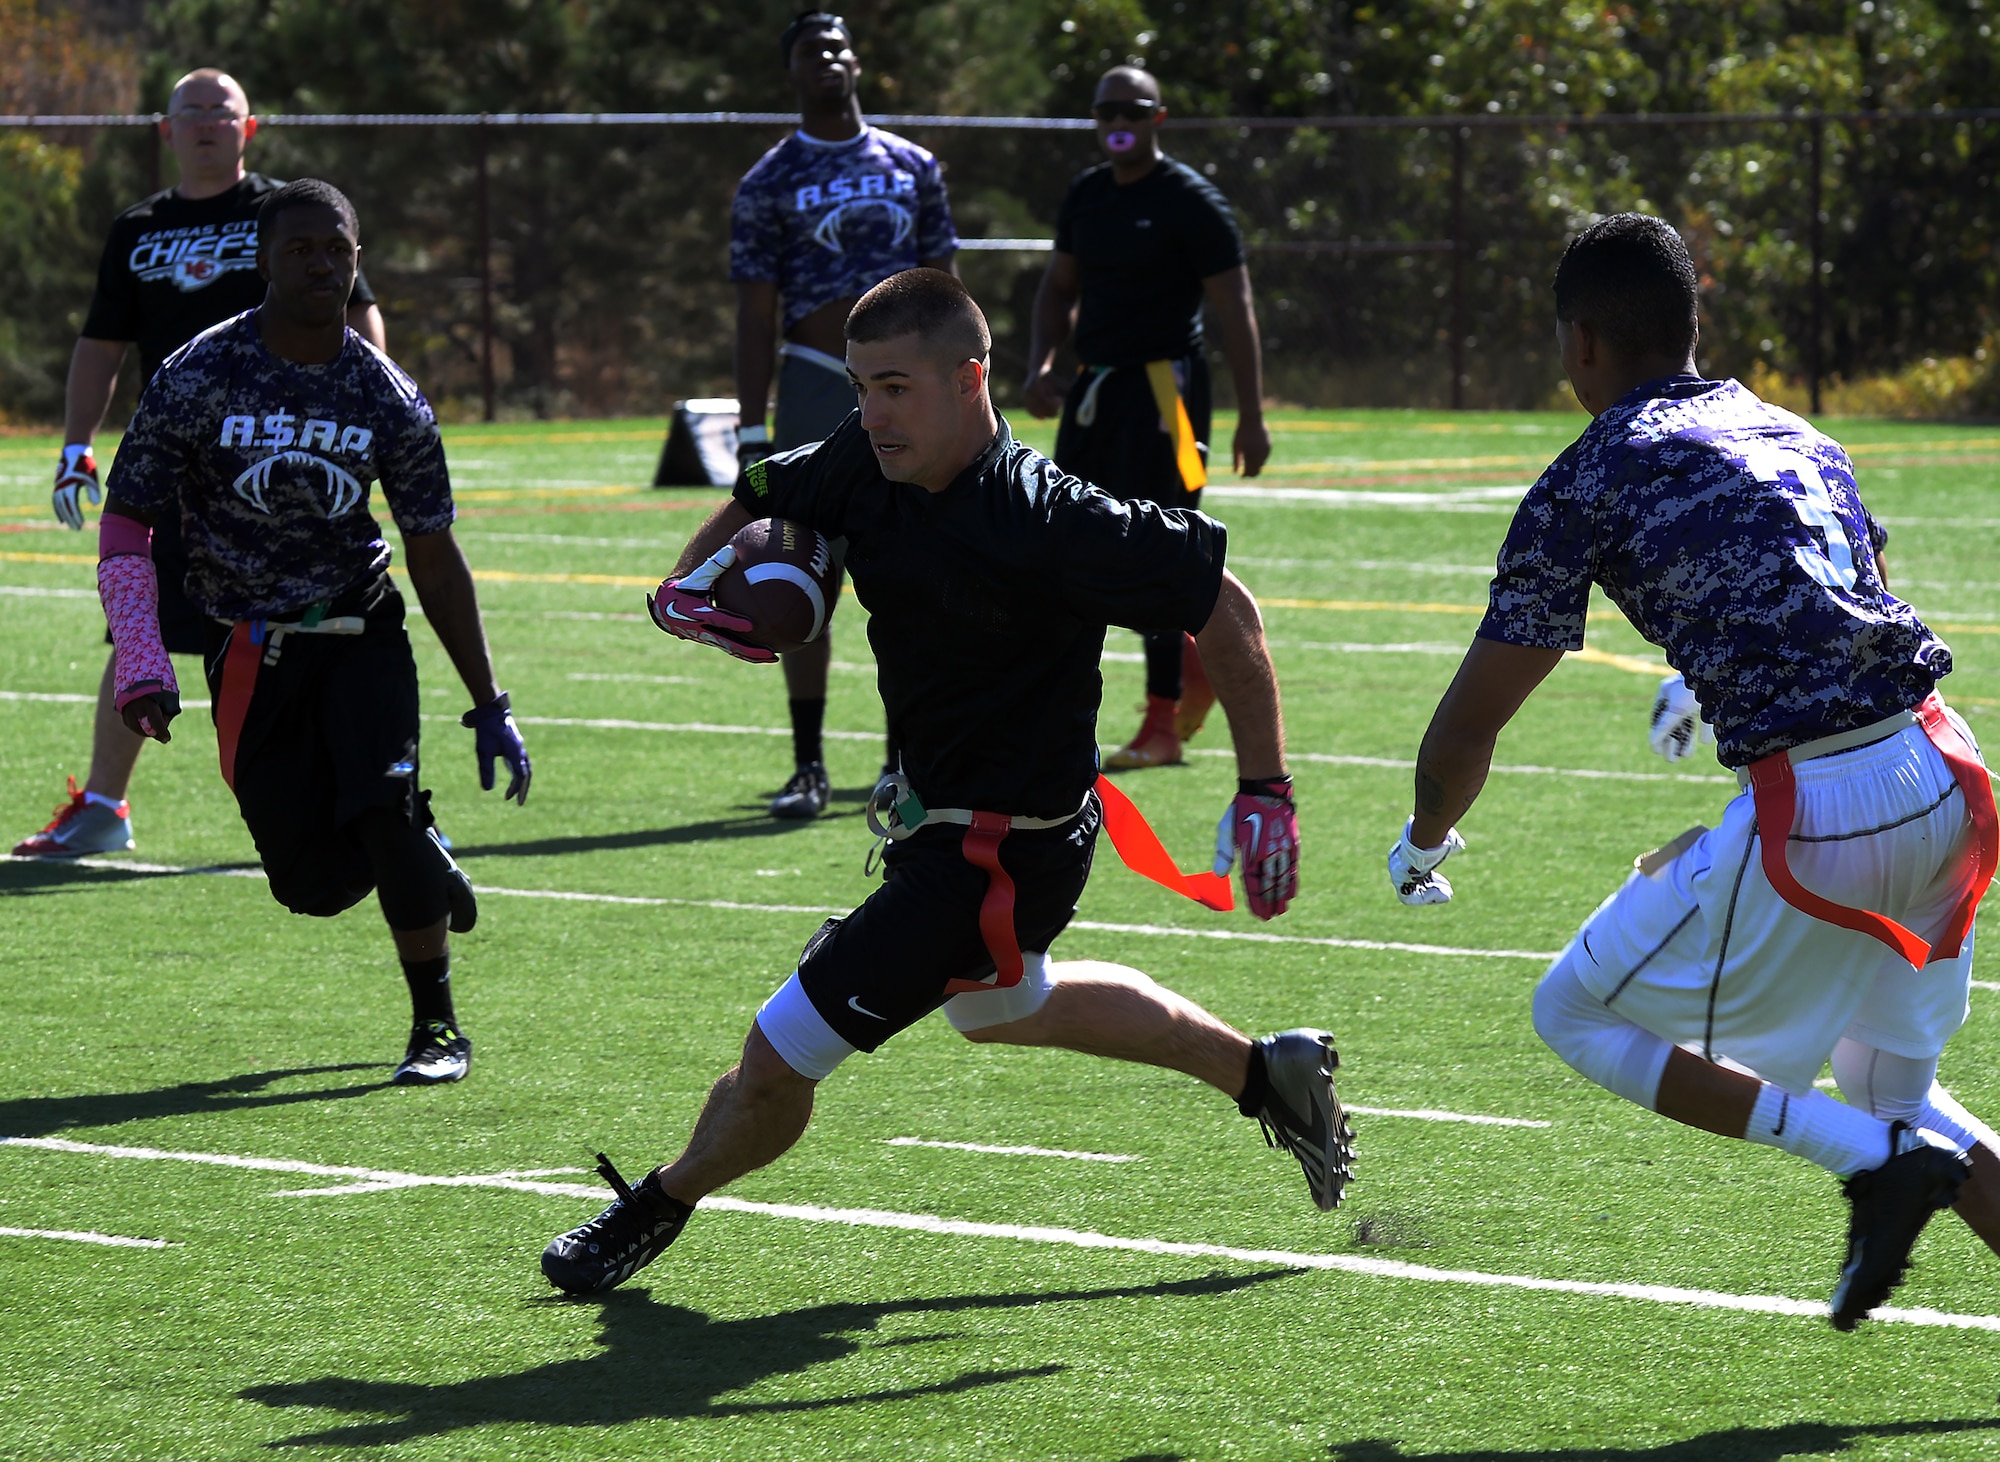 Nicolas Sisco, 90th Missile Maintenance Squadron Electrical Maintenance Team technician, runs past defensemen from Fort Carson, Colo., during a flag football game Oct. 17, 2015, at the U.S. Air Force Academy, Colo. The Warren team came in second in the tournament, falling to the undefeated team from Fort Carson, Colo. (U.S. Air Force photo by Senior Airman Brandon Valle)